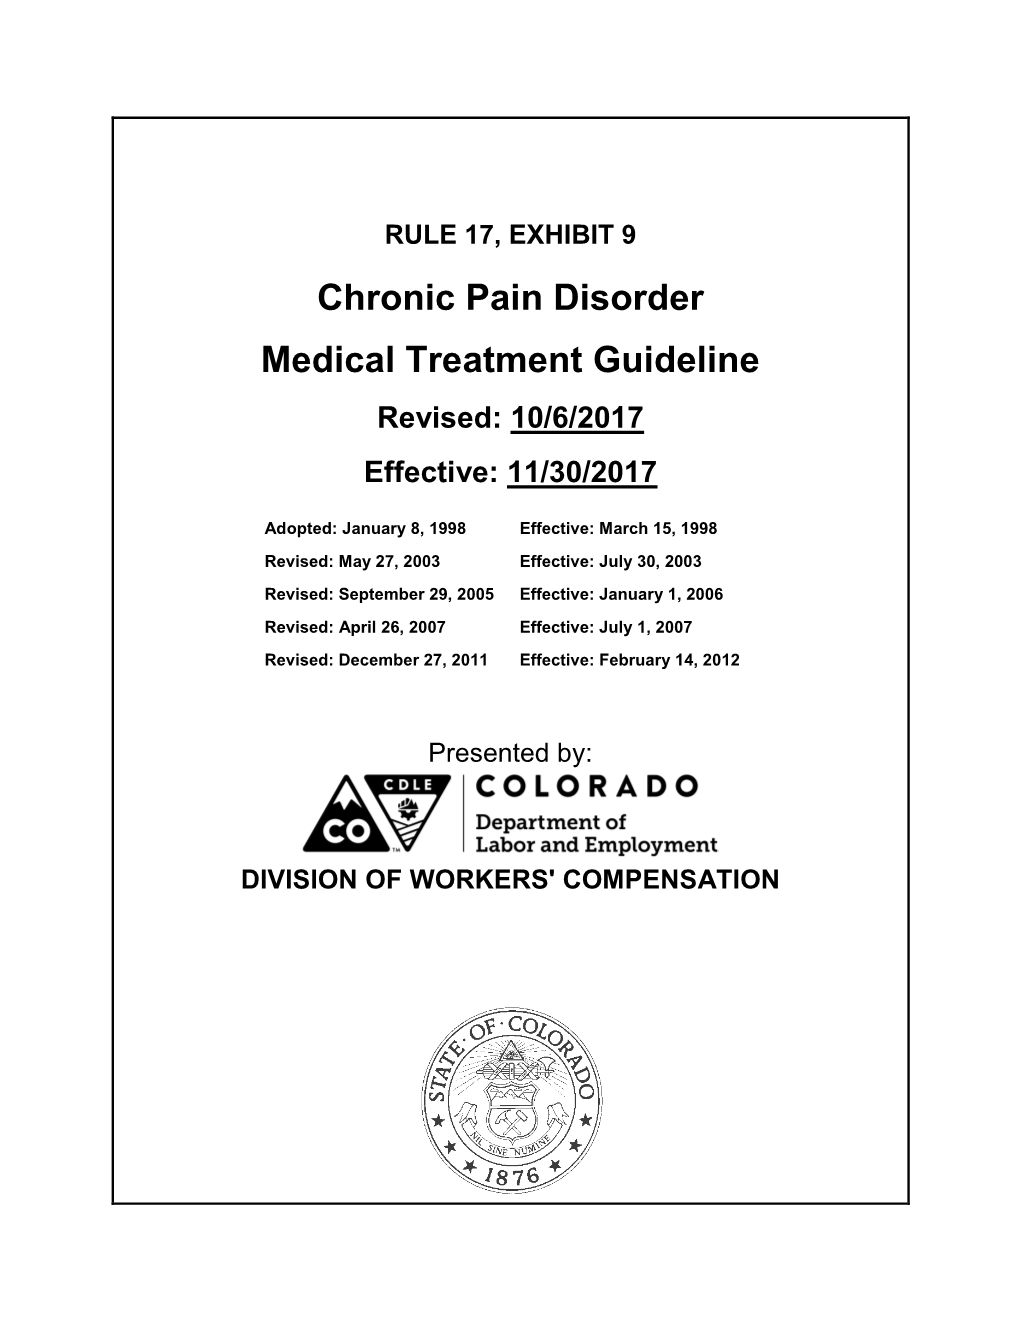 Chronic Pain Disorder Medical Treatment Guideline Revised: 10/6/2017 Effective: 11/30/2017